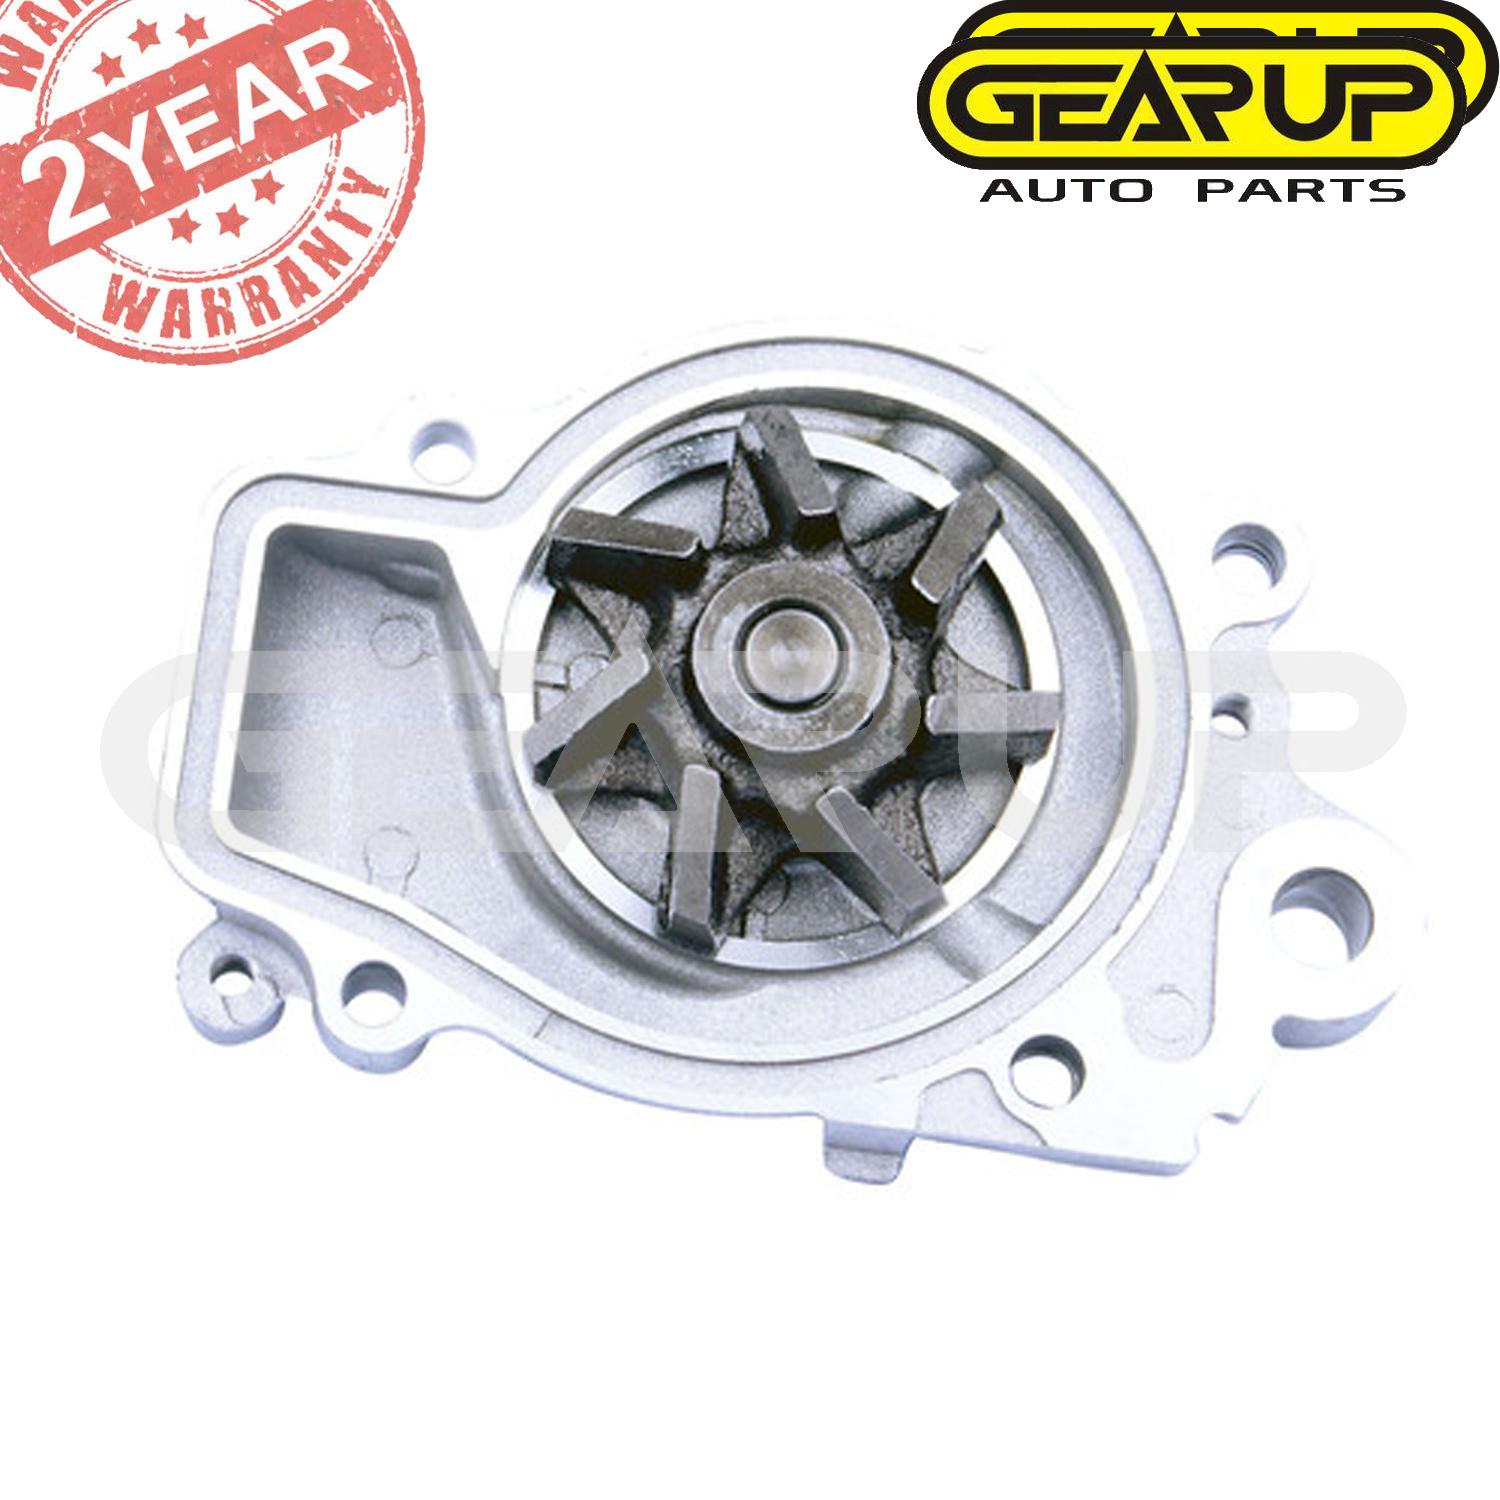 New Water Pump W// Gasket For 1986 1987 1988 1989 Acura Integra 1.6L DOHC AW9115